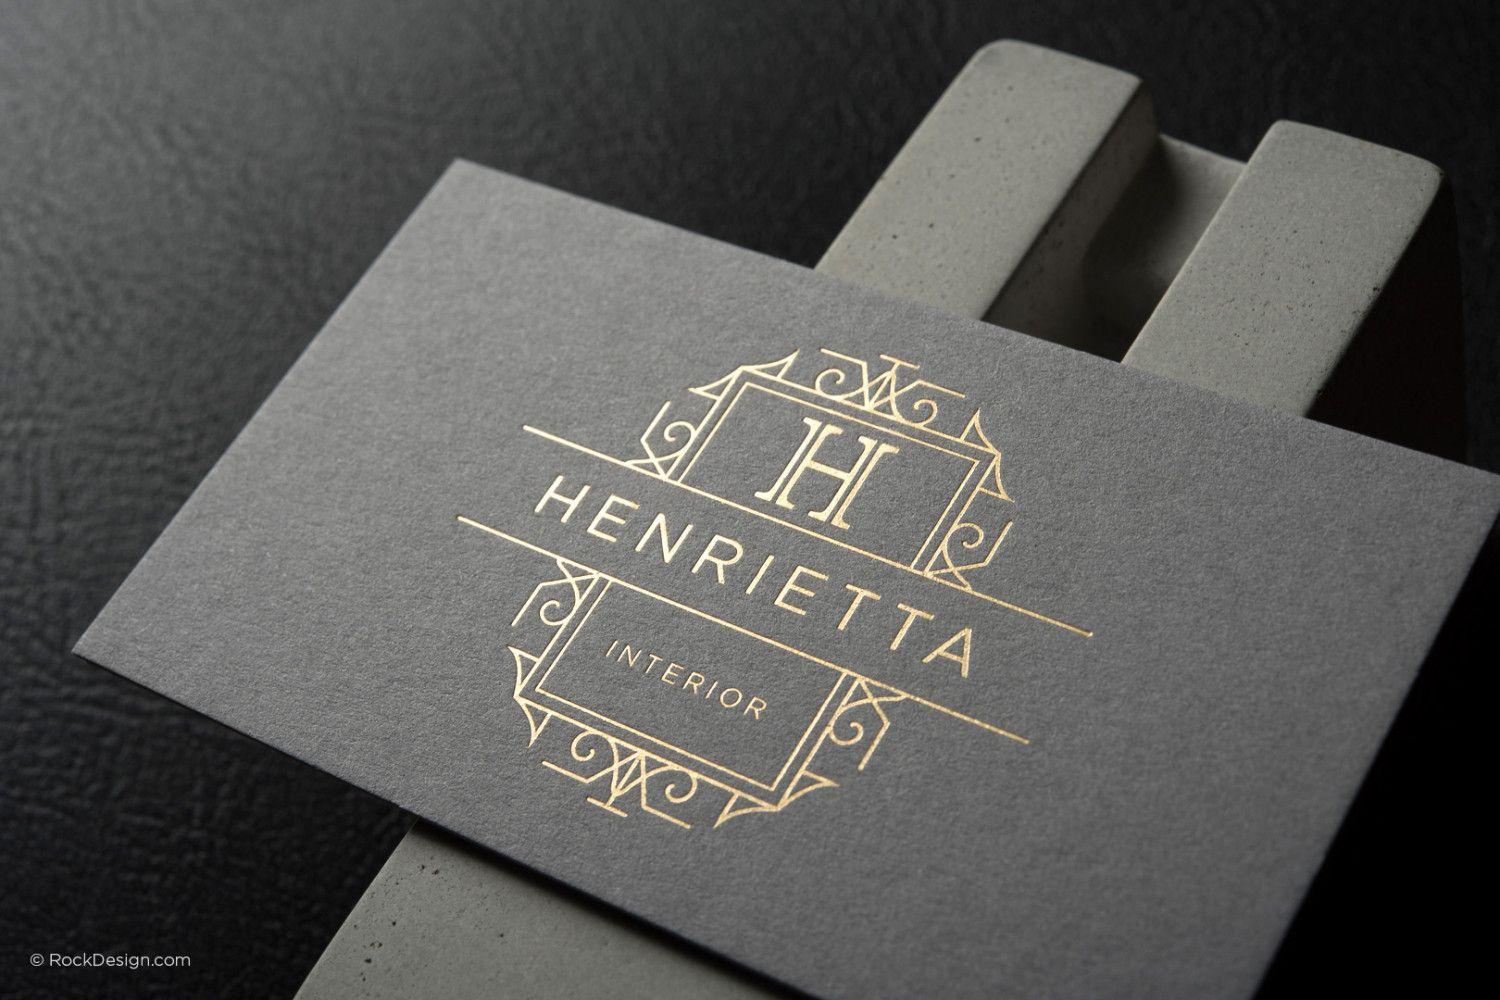 Gray and Gold Logo - FREE vintage business card templates | RockDesign.com